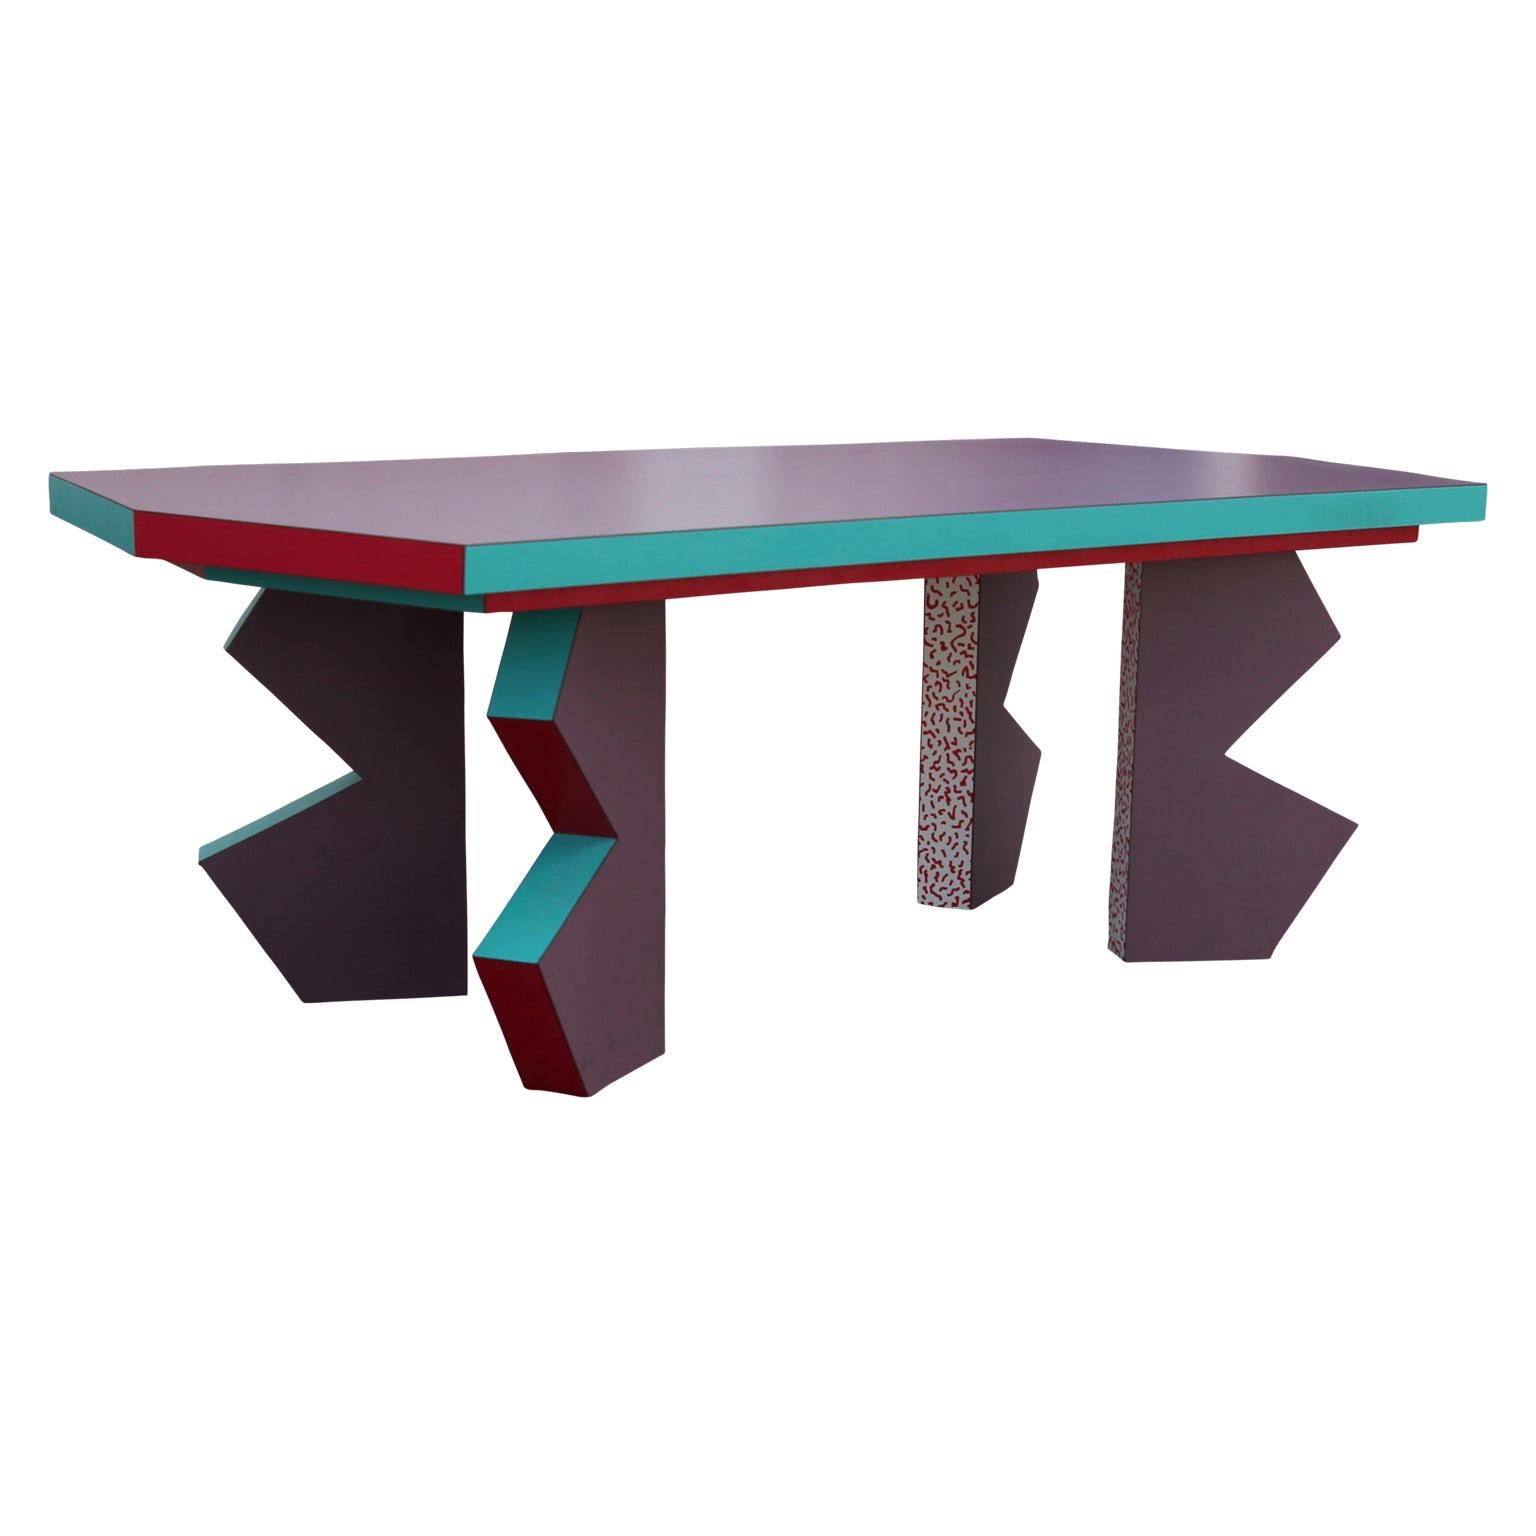 Postmodern Memphis Style Pink, Teal, and Purple Zig Zag Table